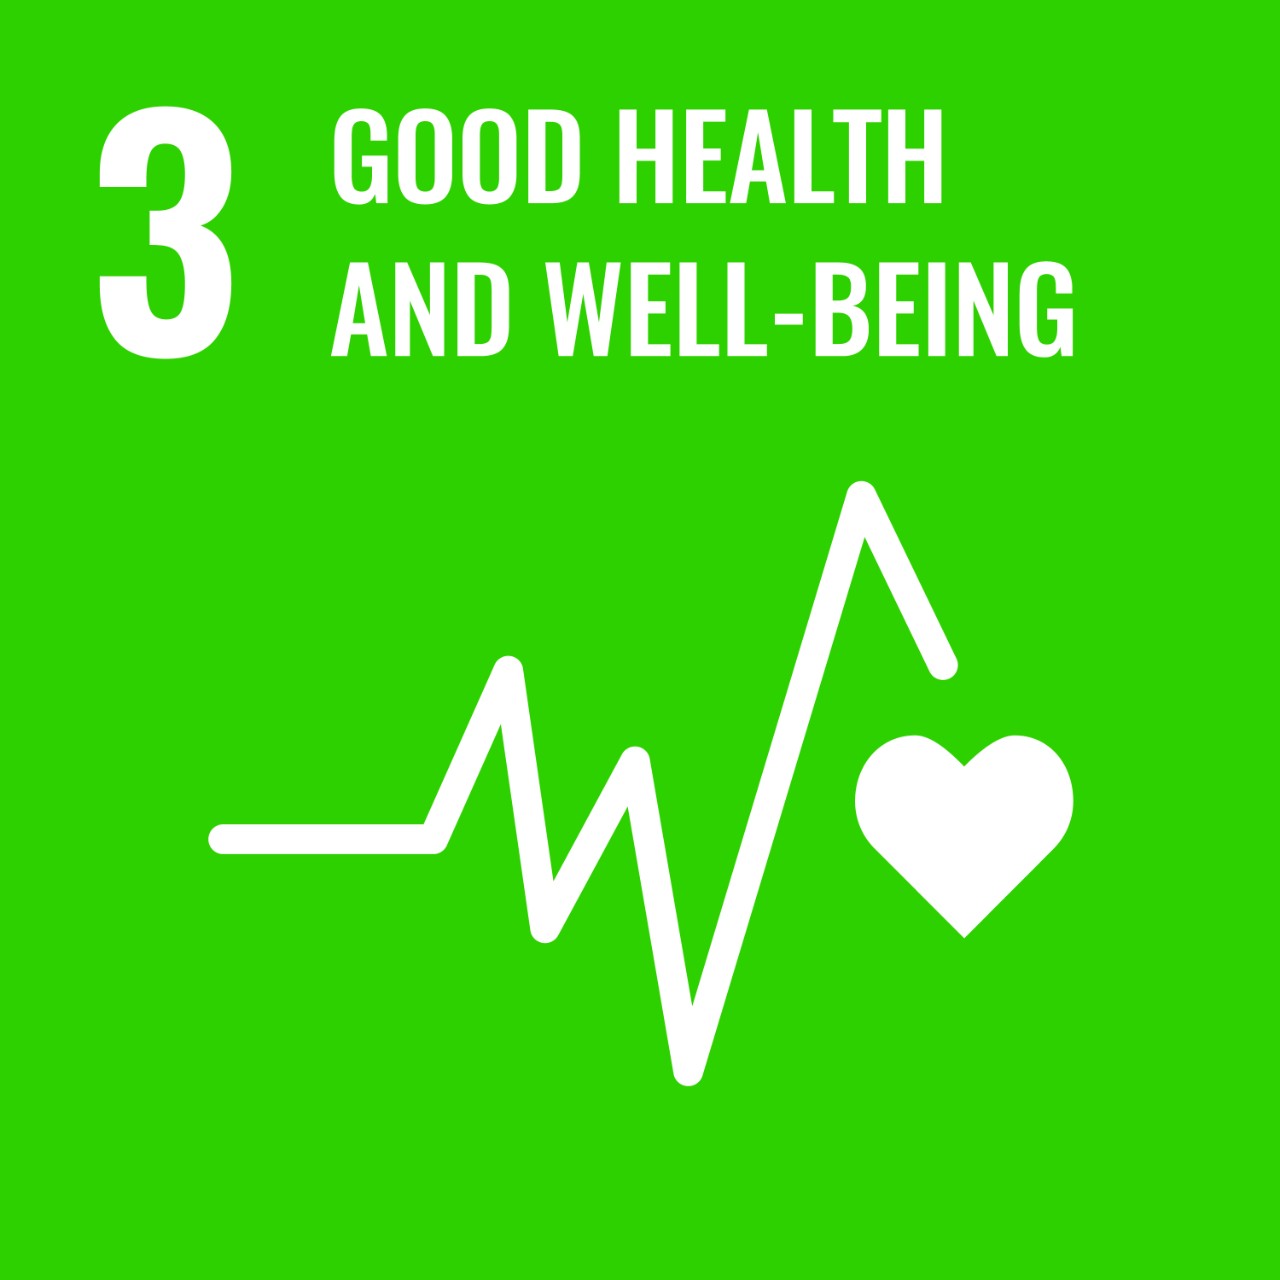 SDG 3 Good health and well being